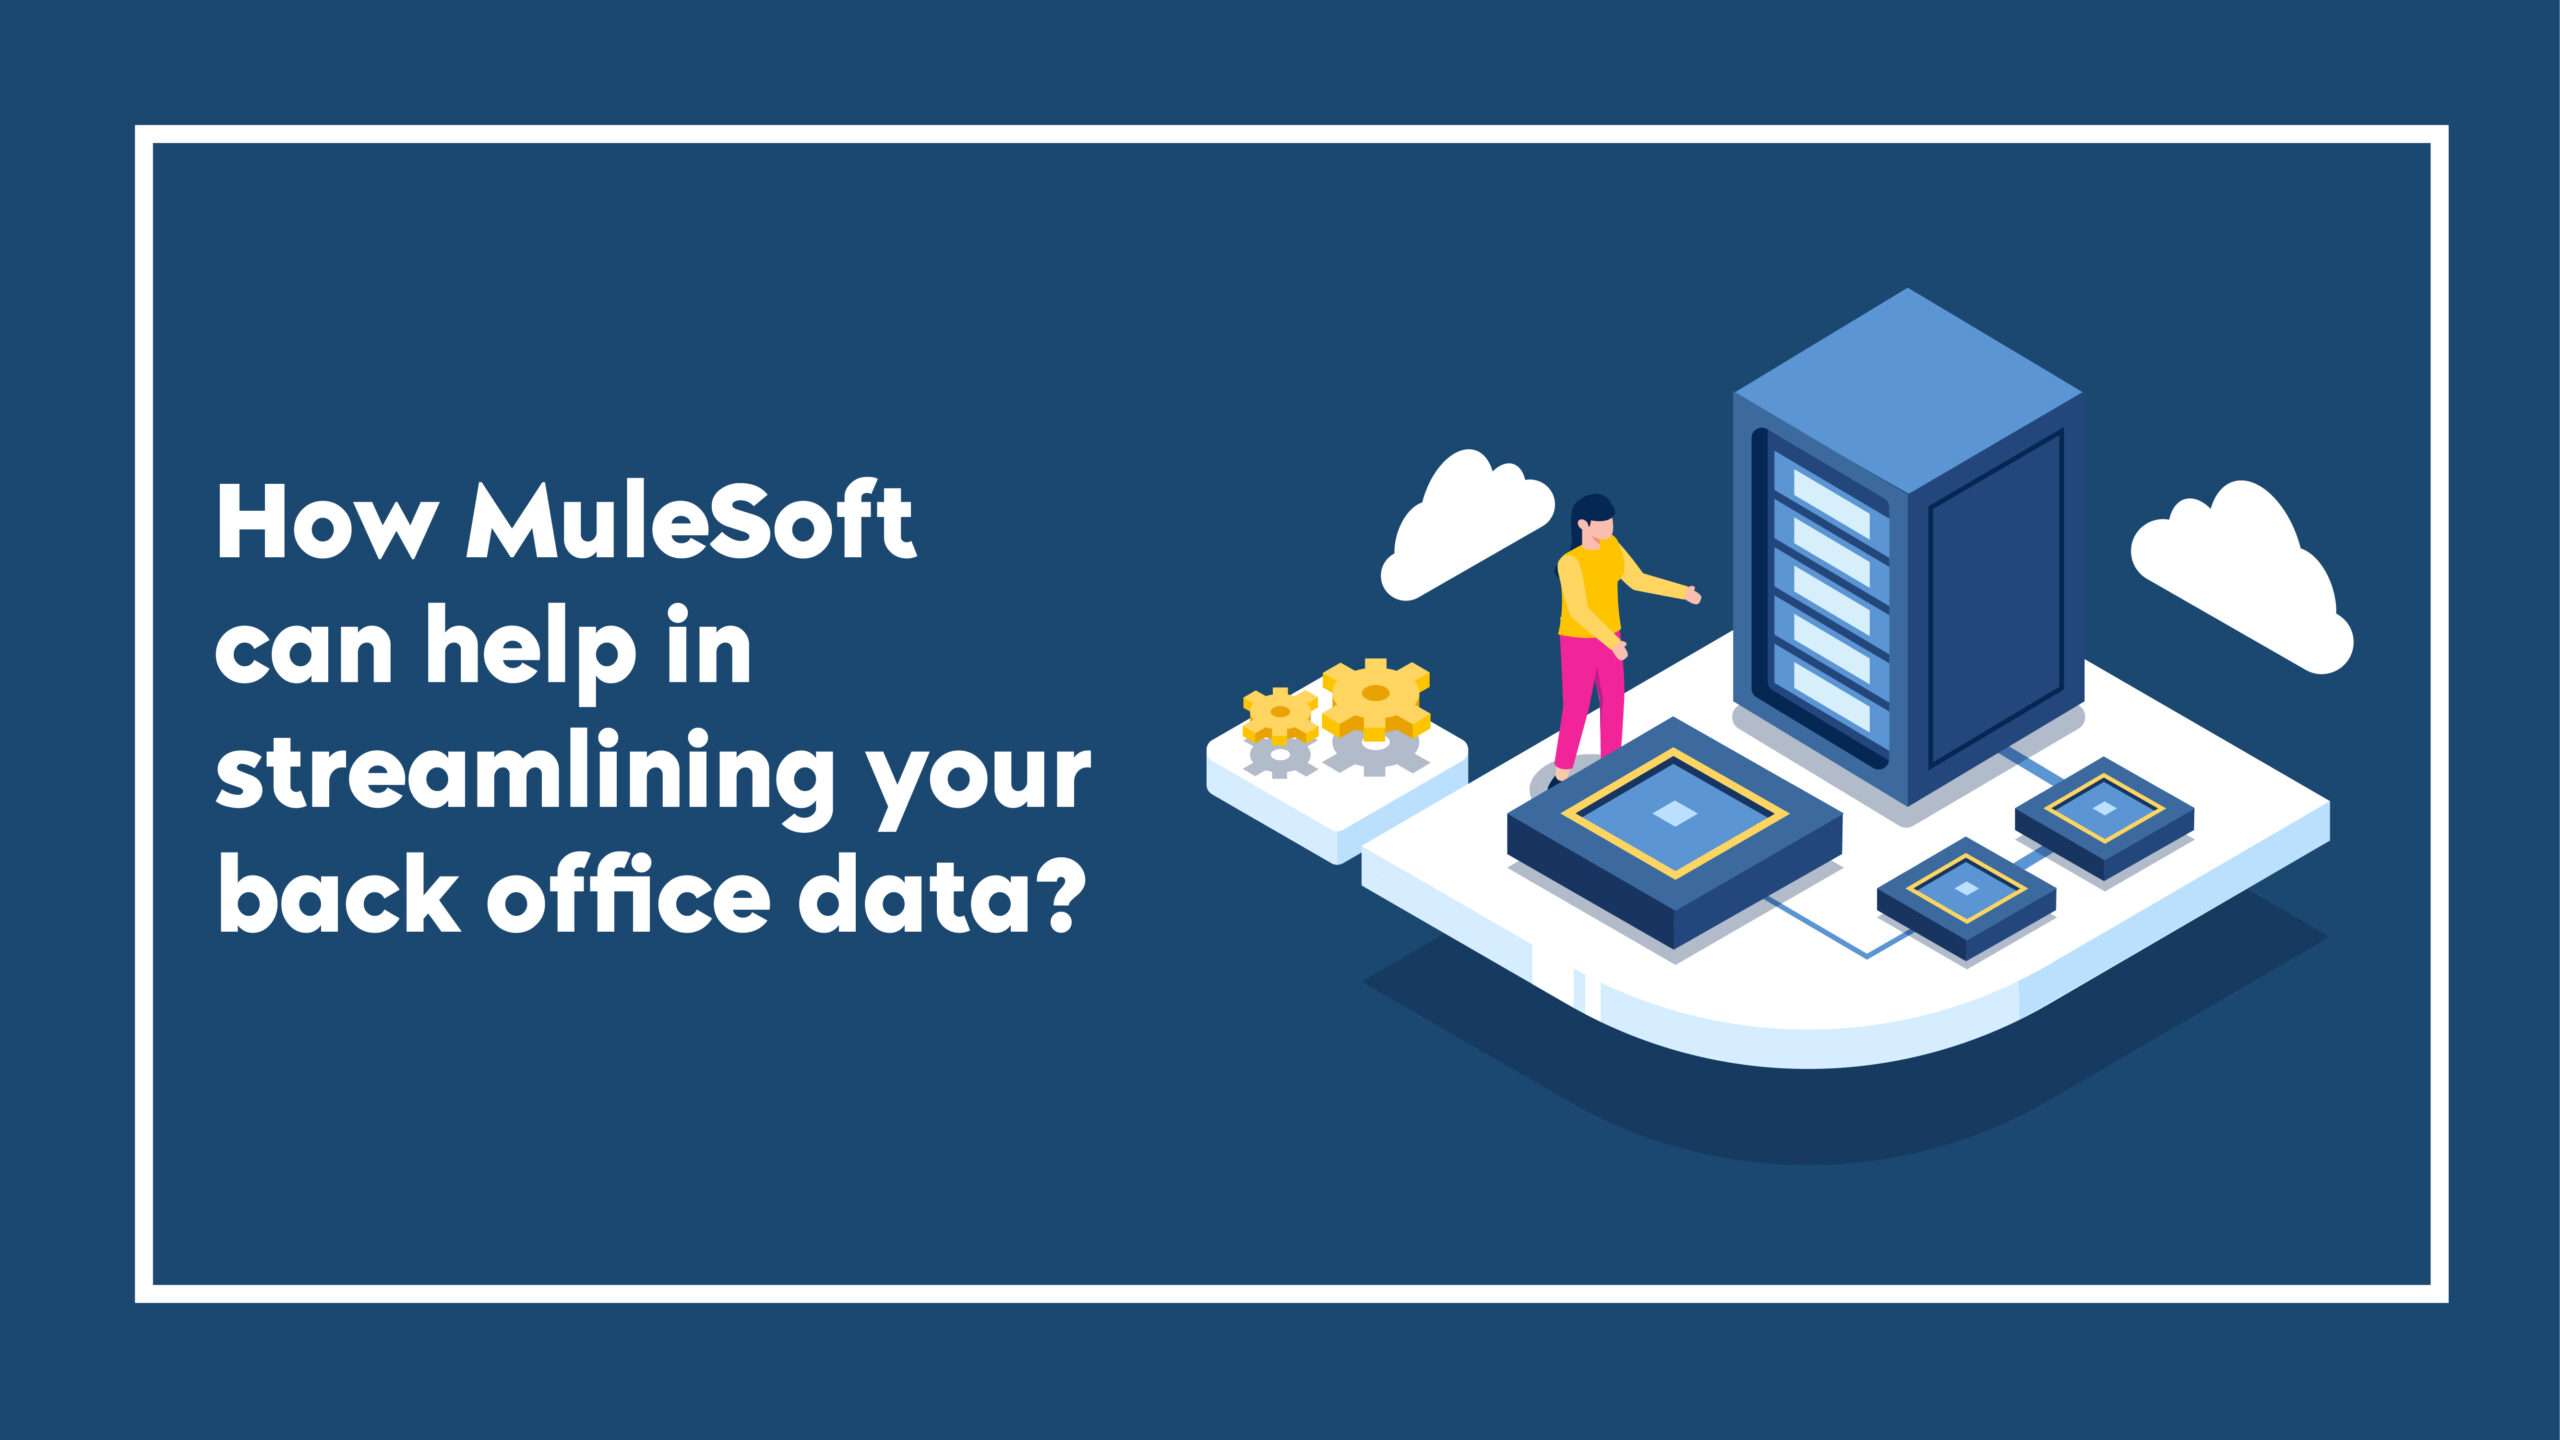 How MuleSoft can help in streamlining your back office data?